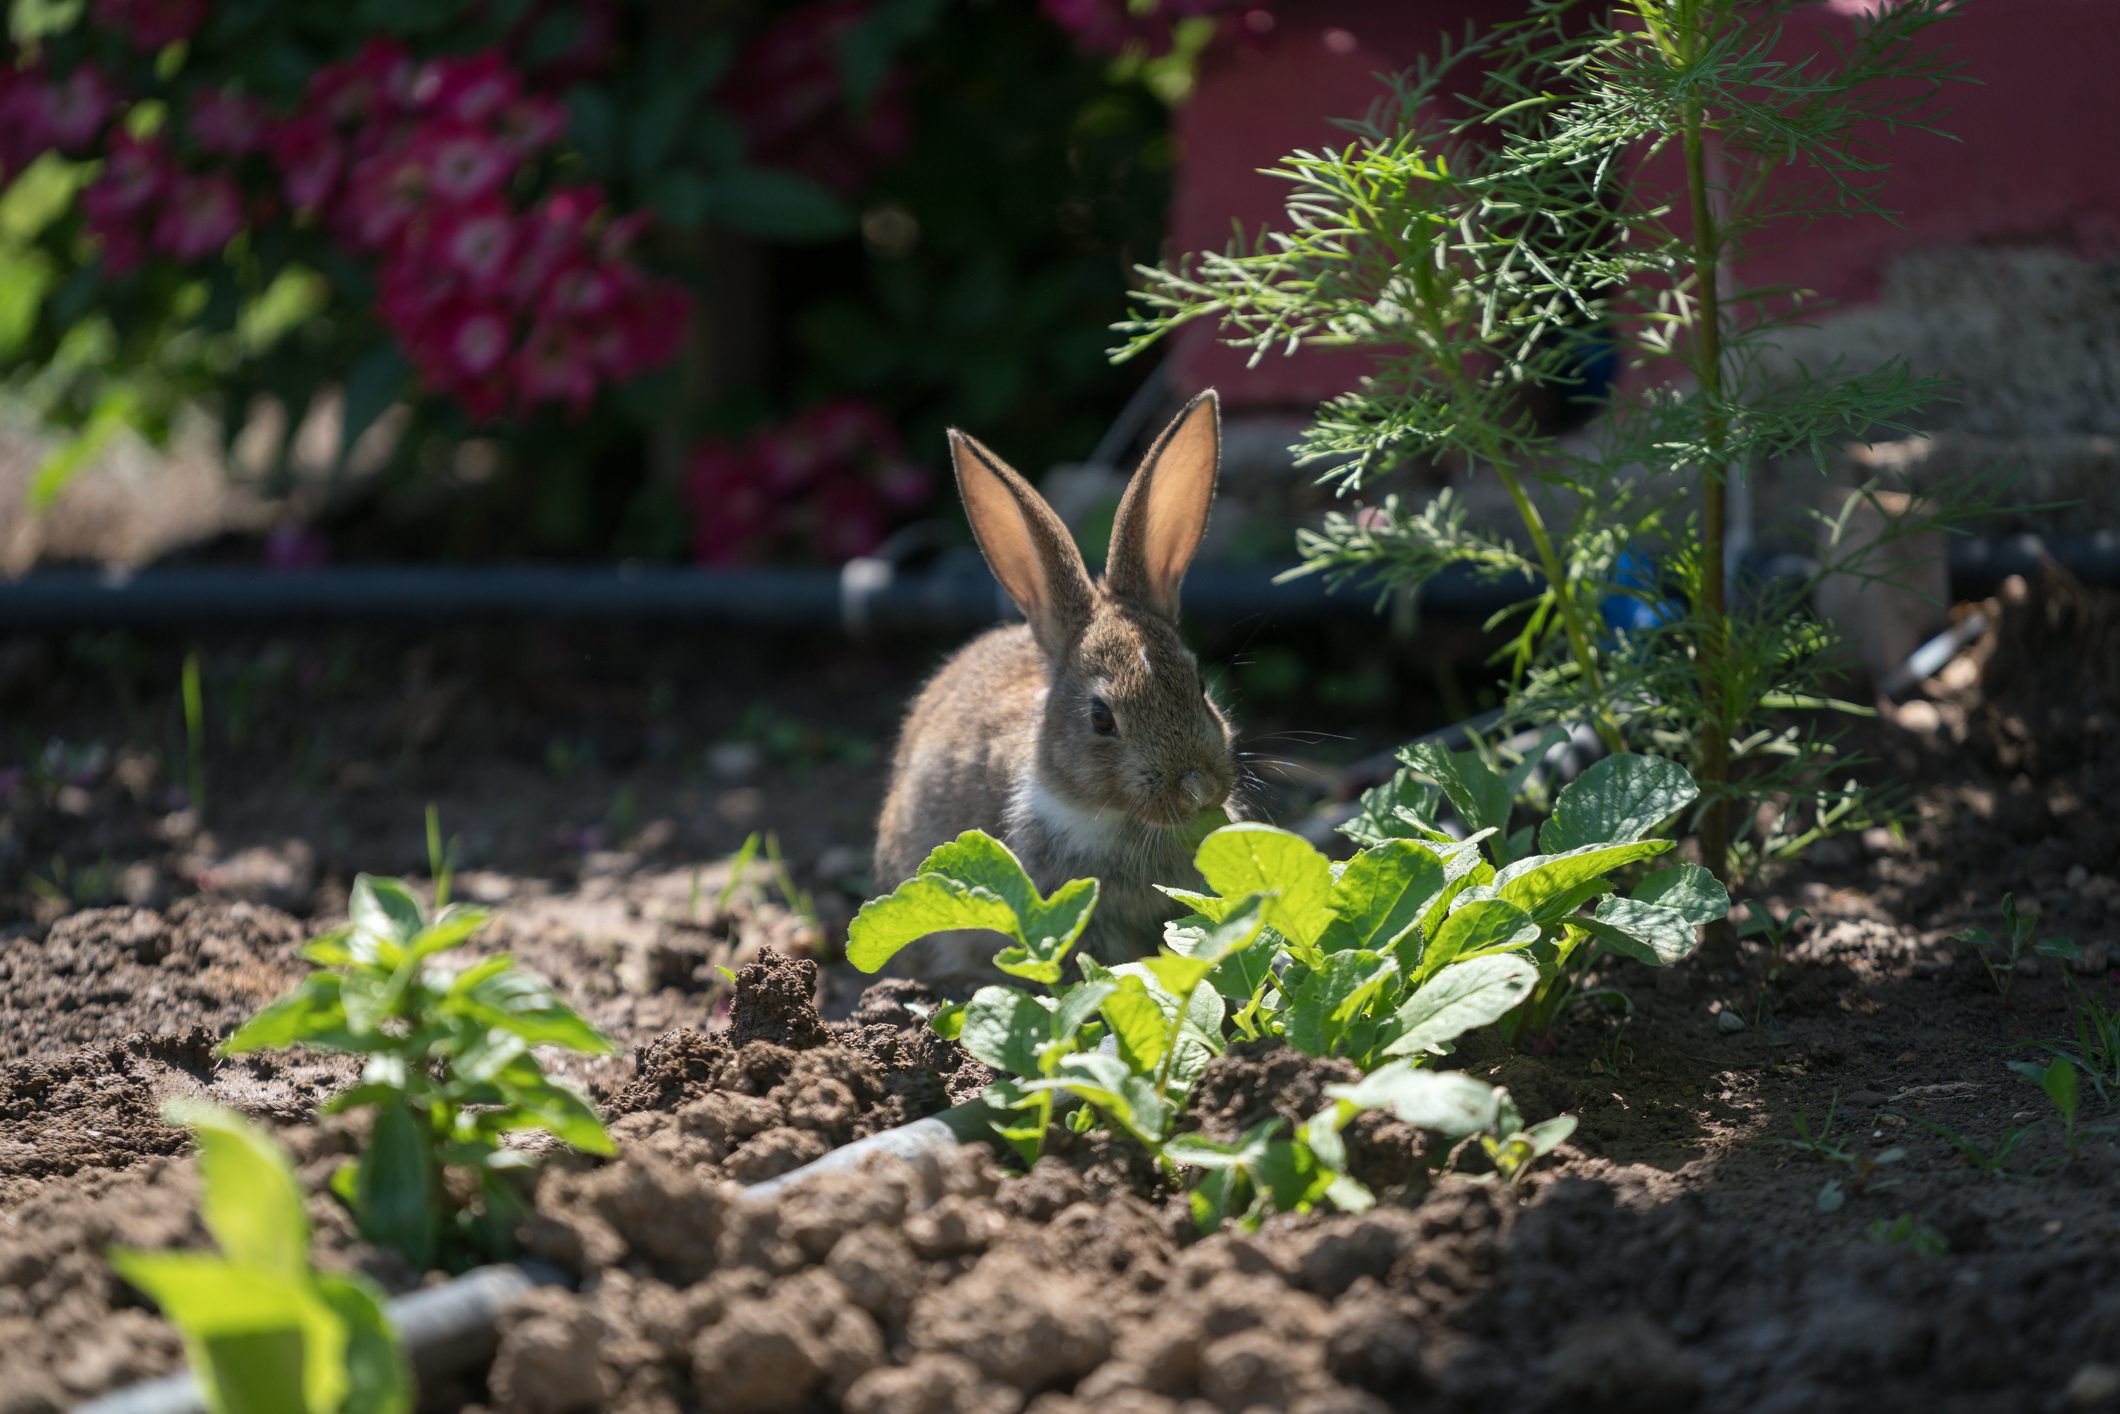 pesky Cottontail bunny rabbit munching grass in the garden